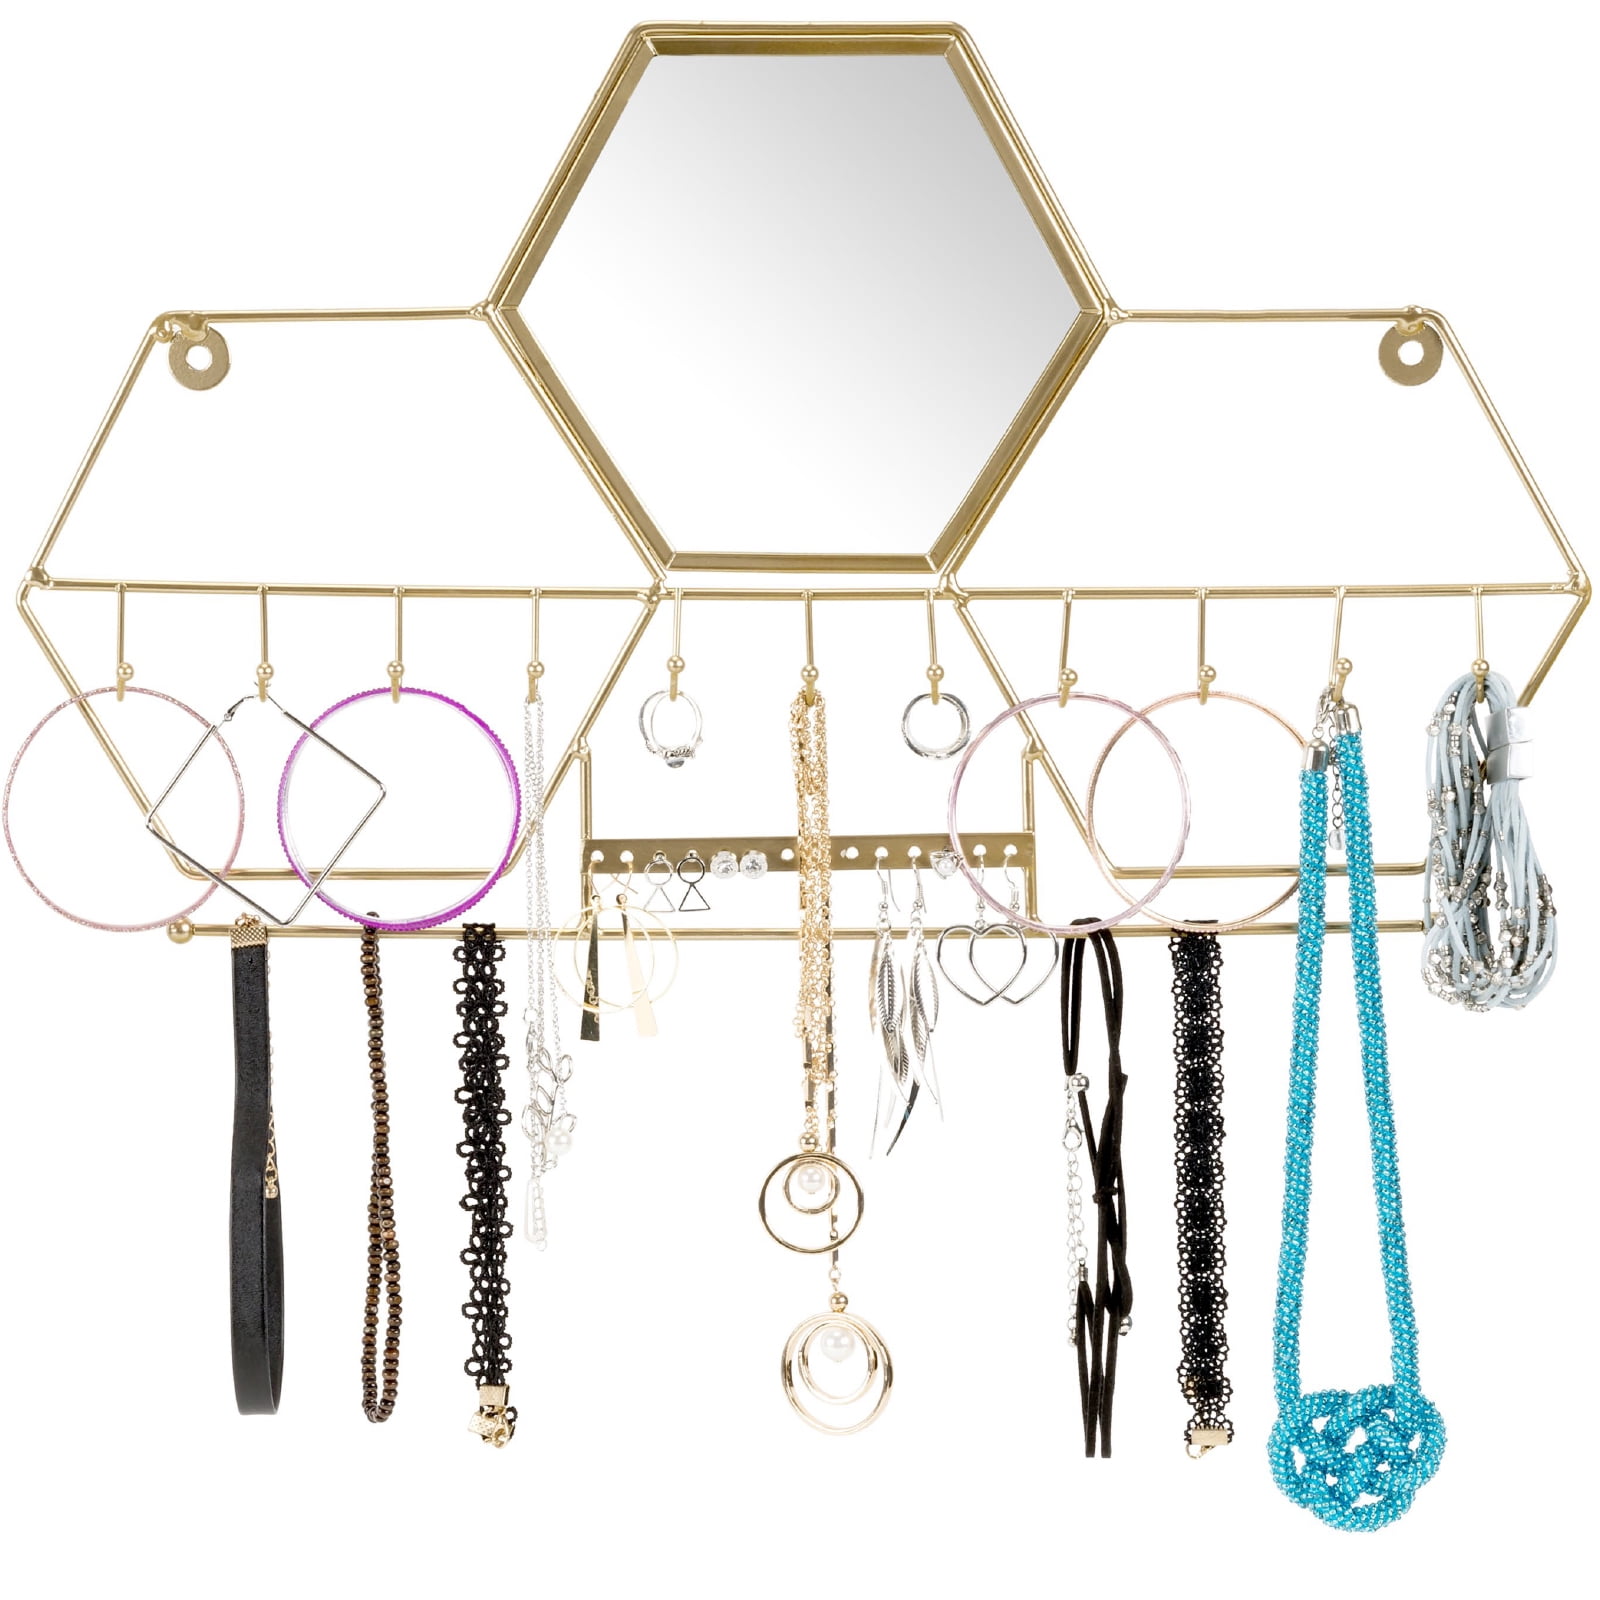 Hanging Jewelry Organizer Wall Mounted Necklace Display Stand Holder with Hooks 